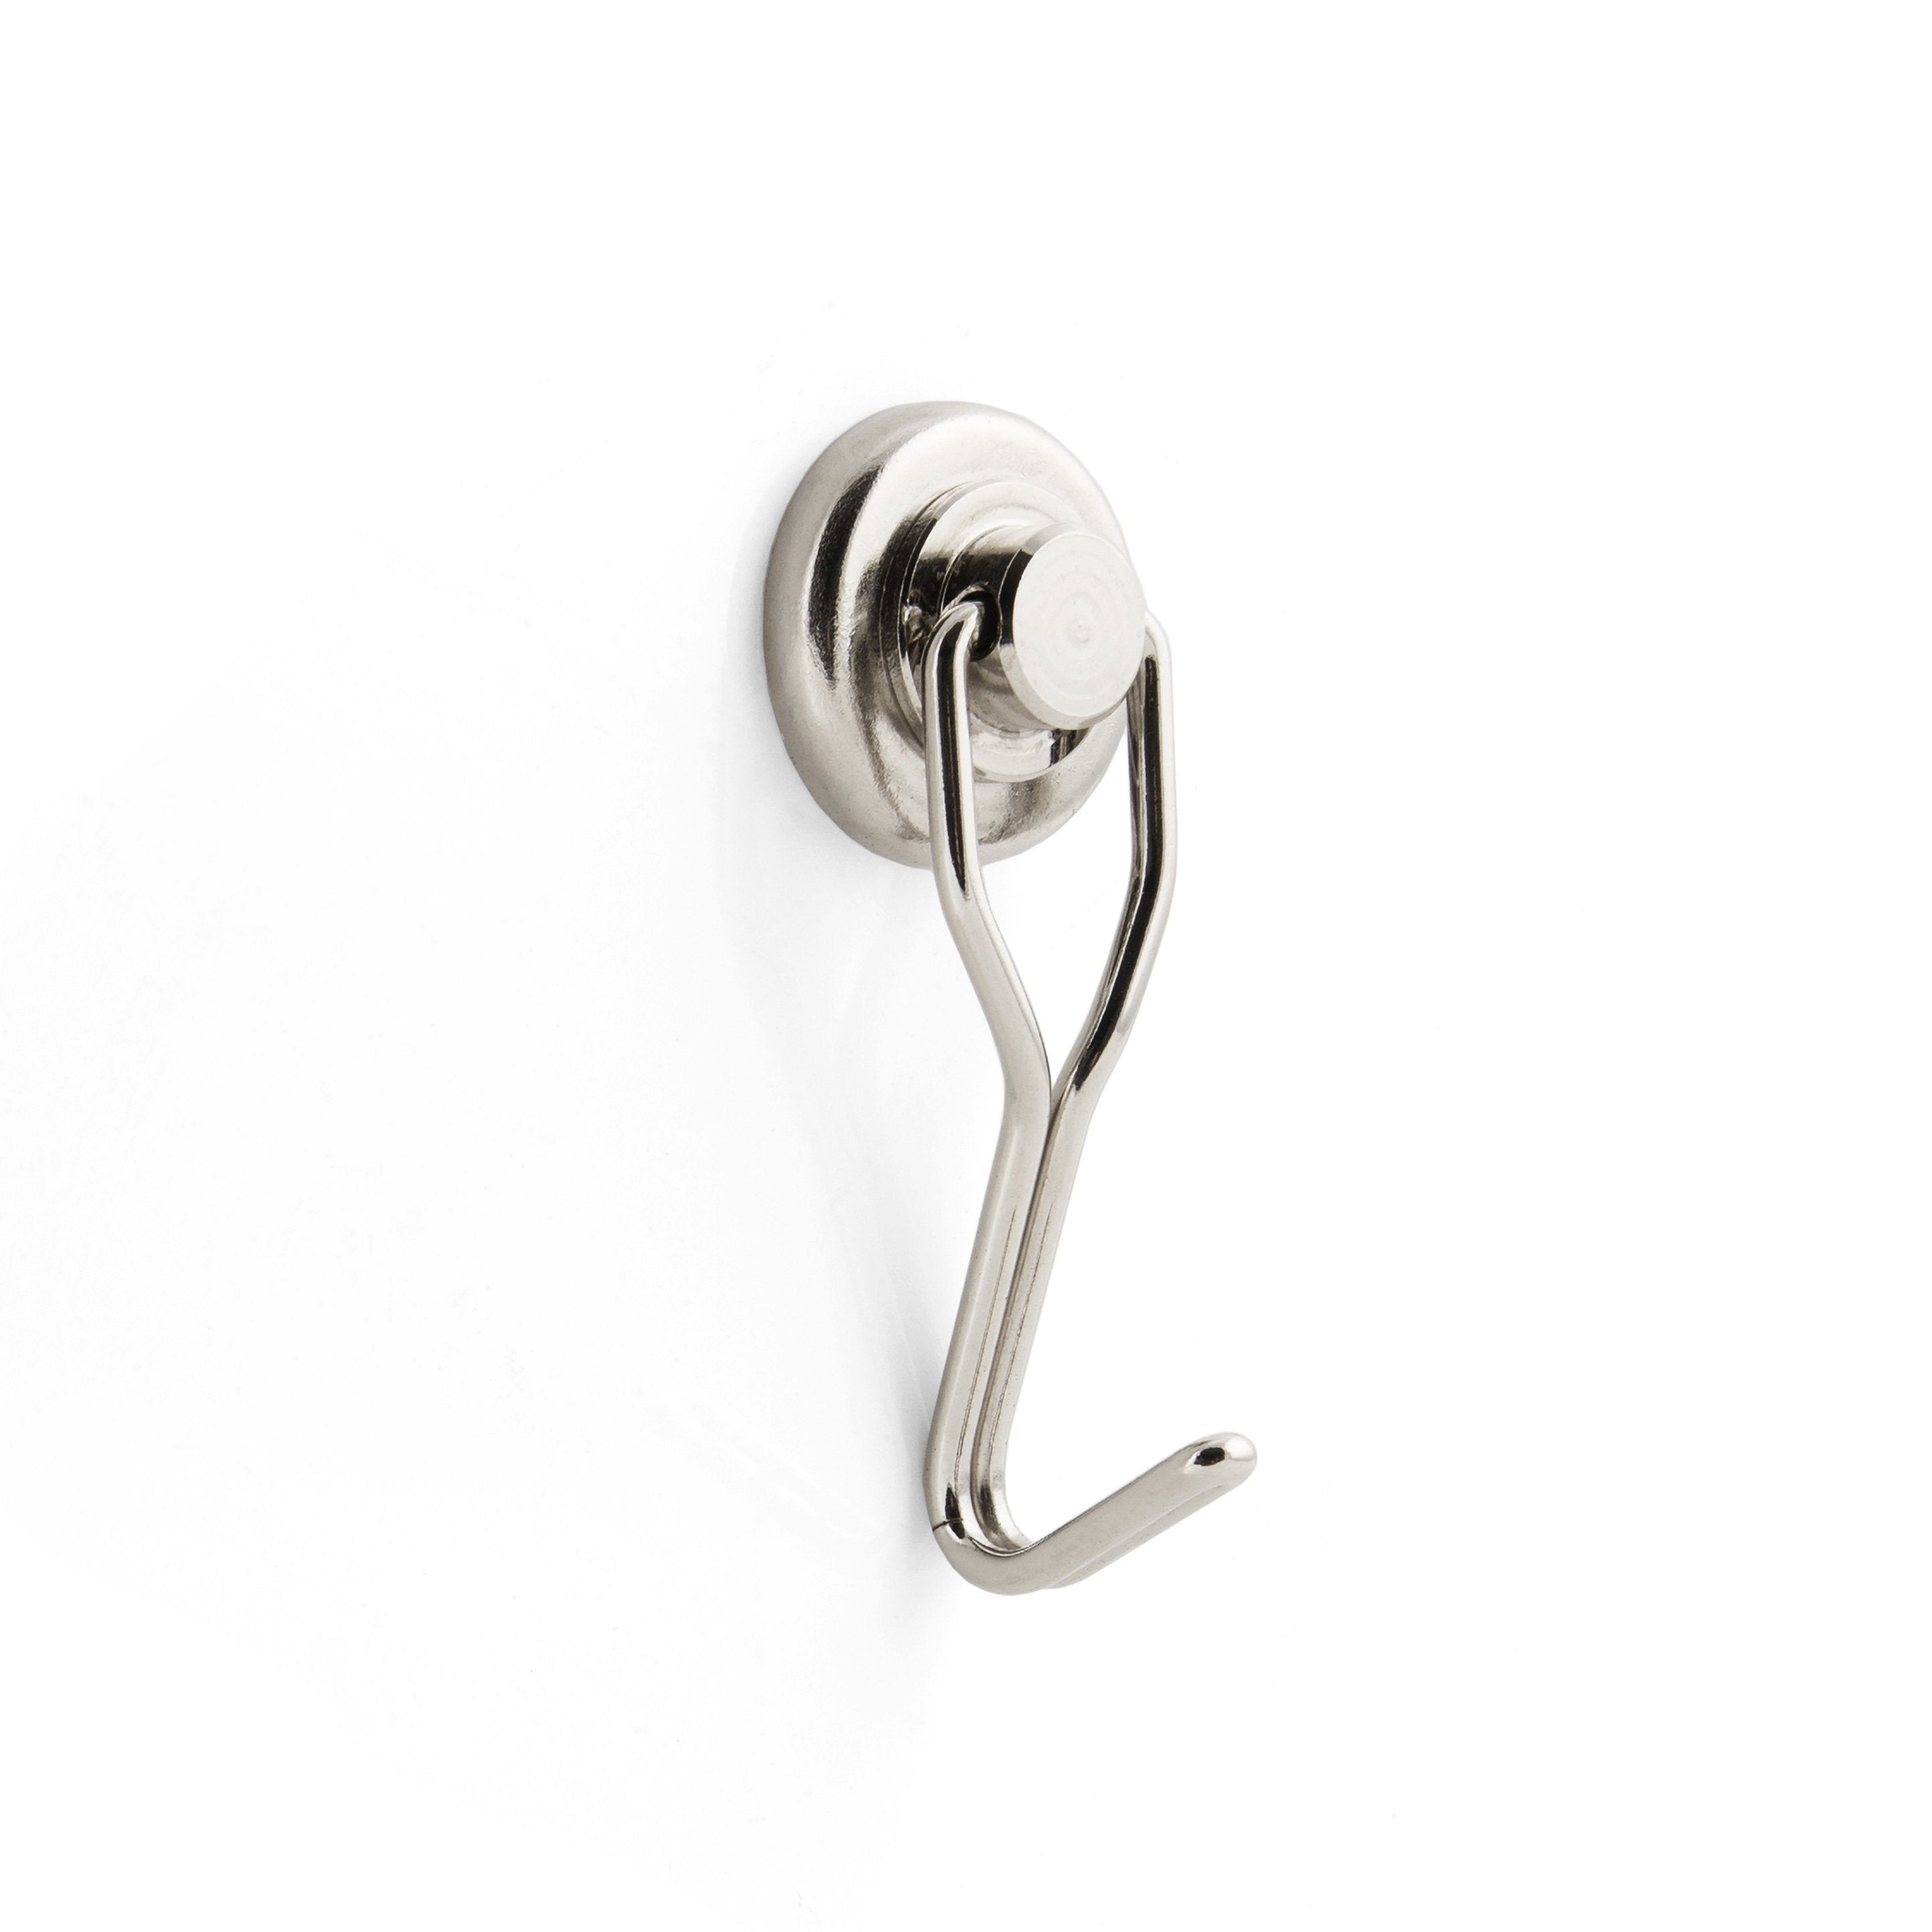 Loco Stainless Steel 3 Gang Hooks With Swivels - Addict Tackle